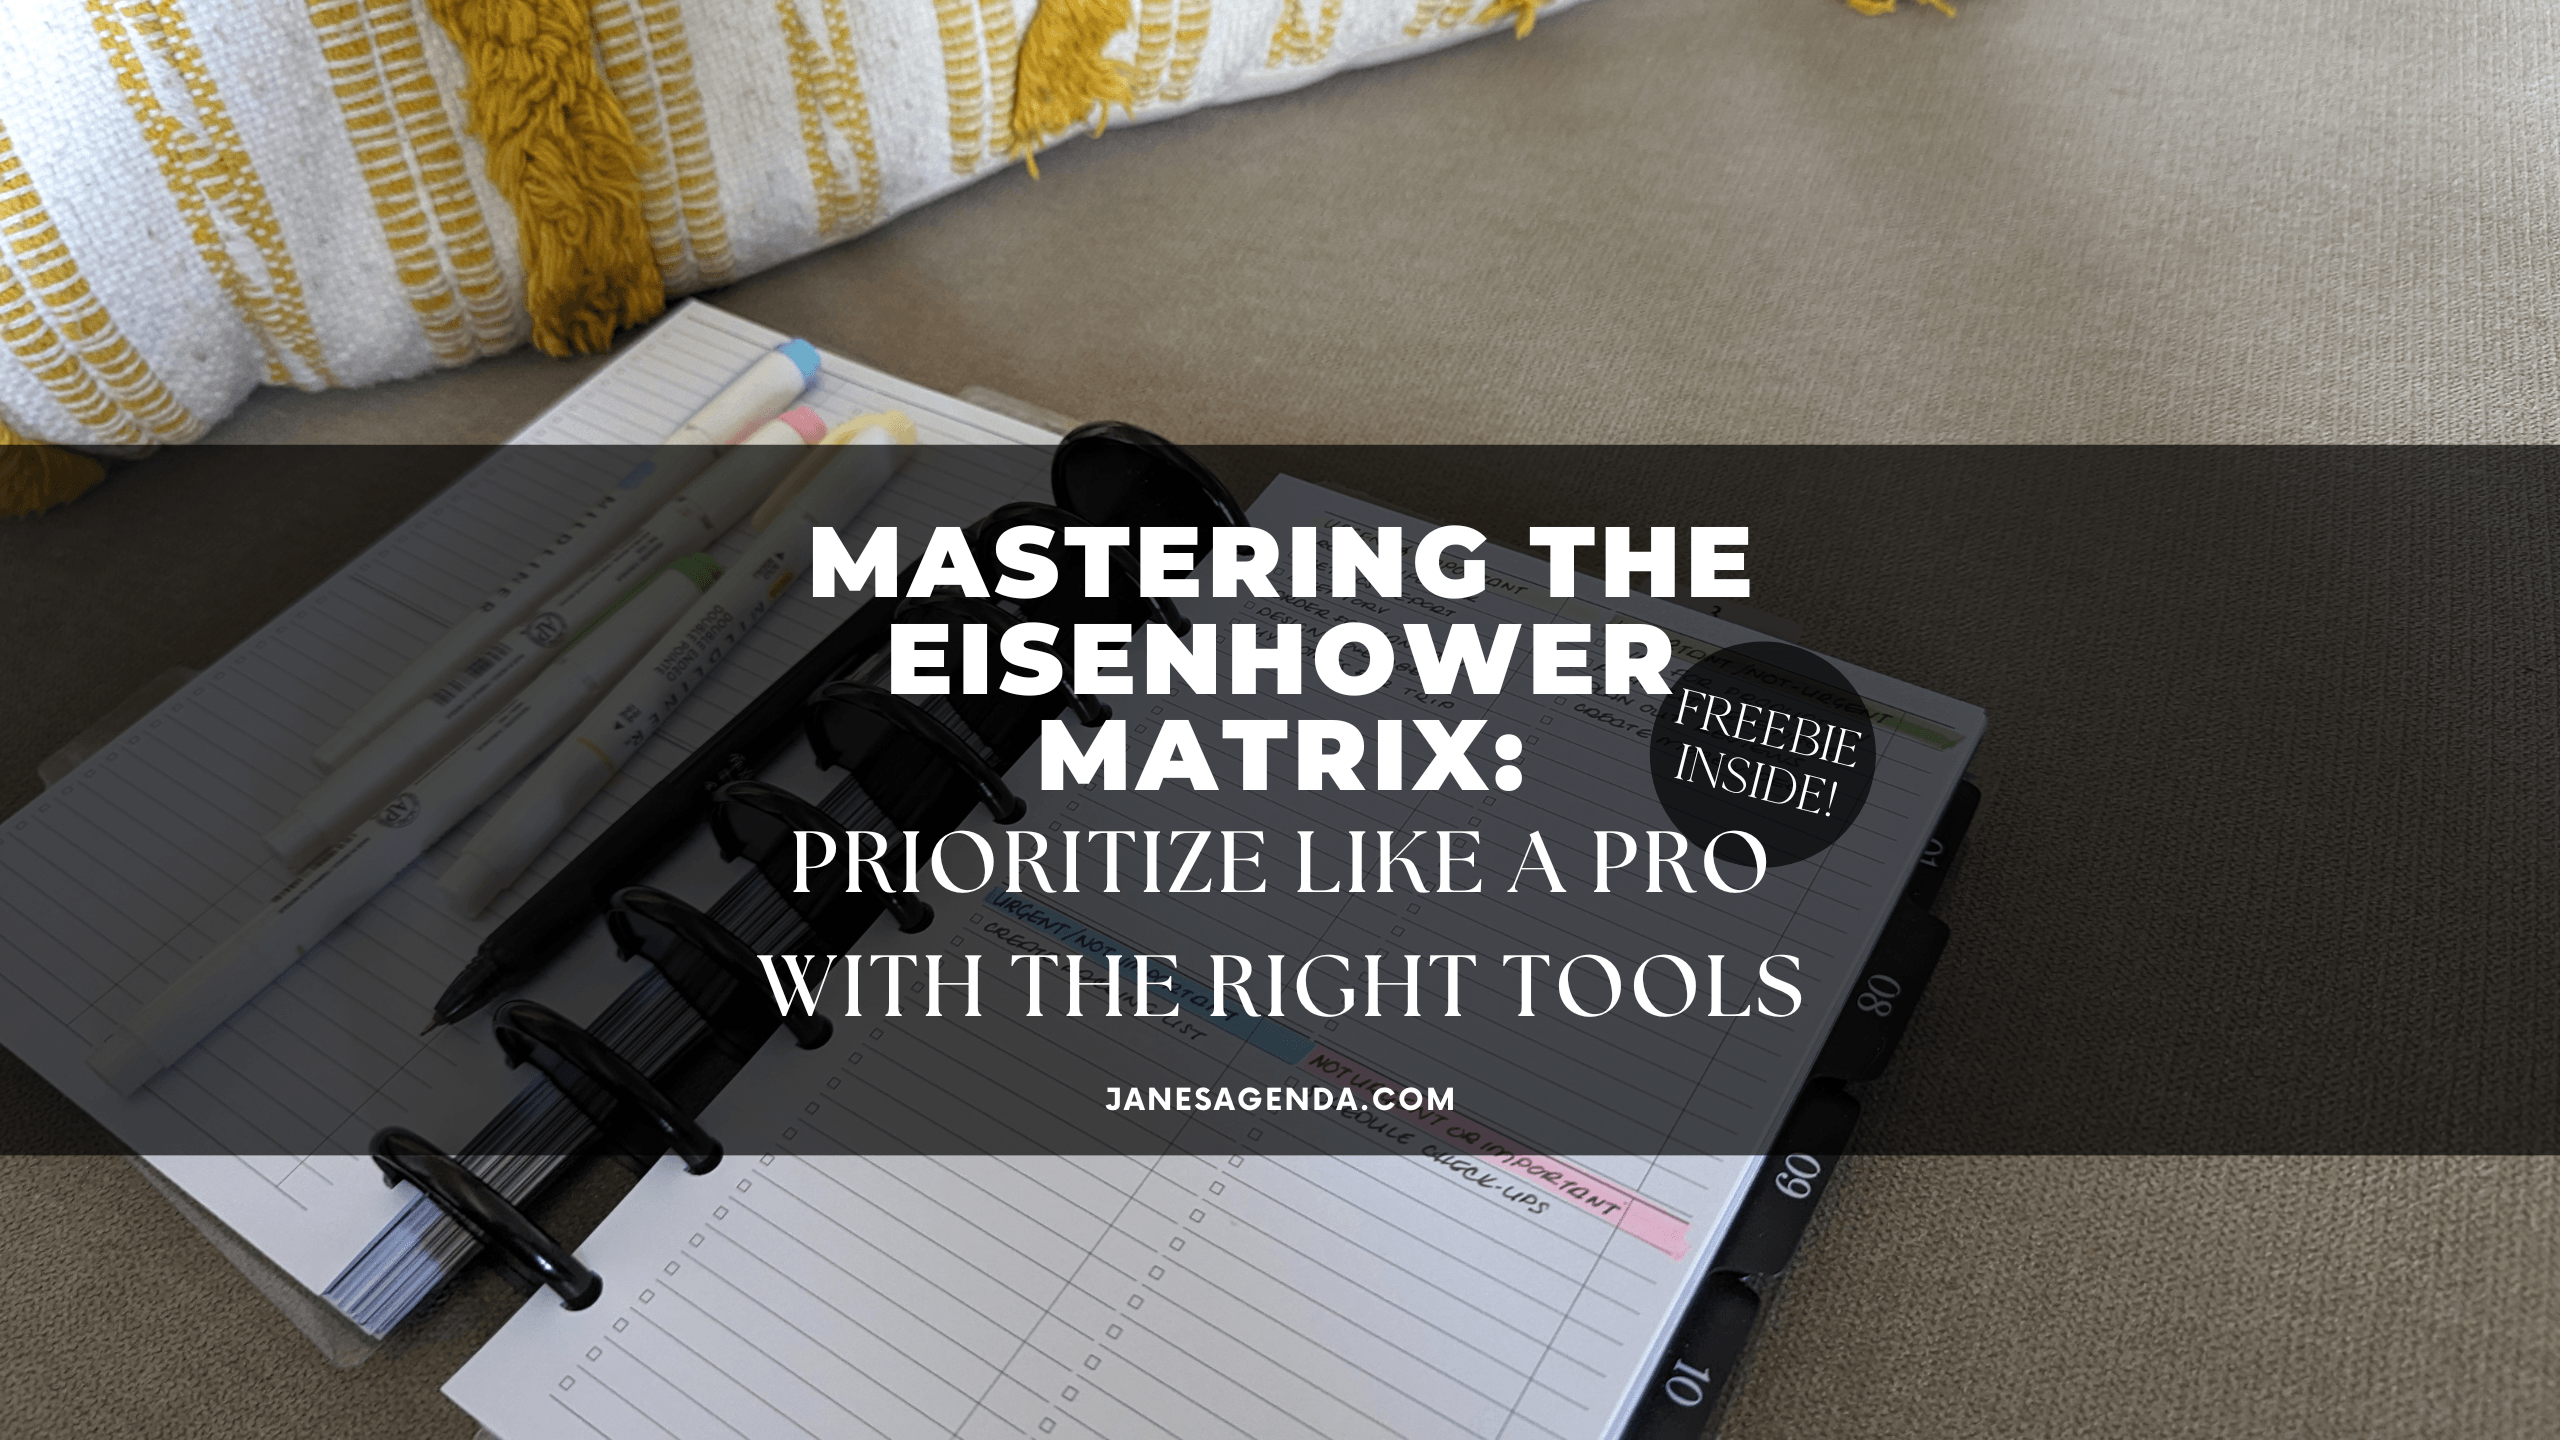 Mastering the Eisenhower Matrix: Prioritize Like a Pro with the Right Tools - Jane's Agenda®